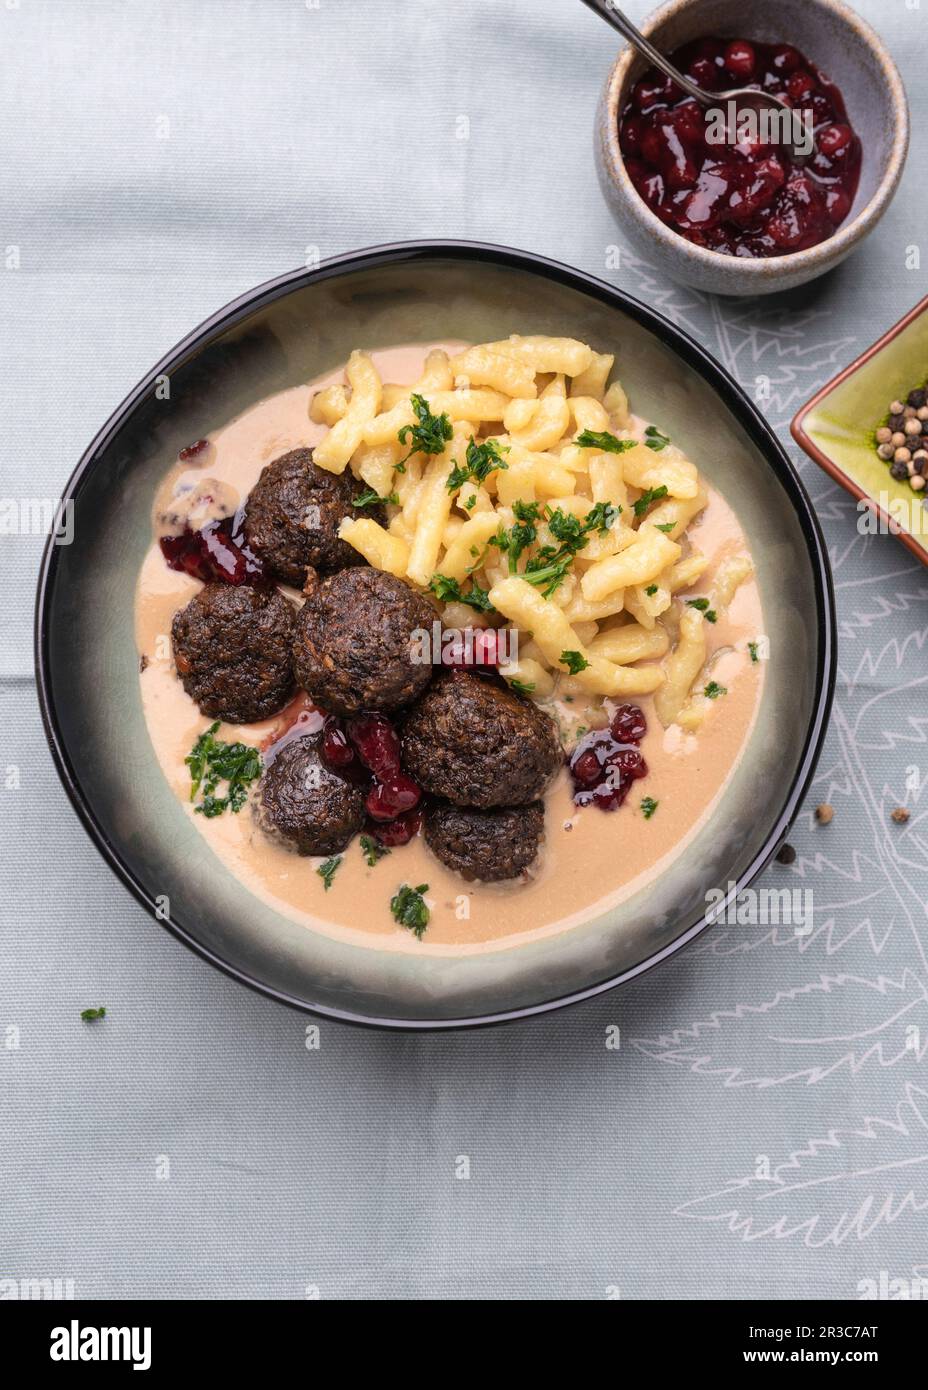 Vegan 'Köttbullar' made from lentils with cranberries and spaetzle Stock Photo